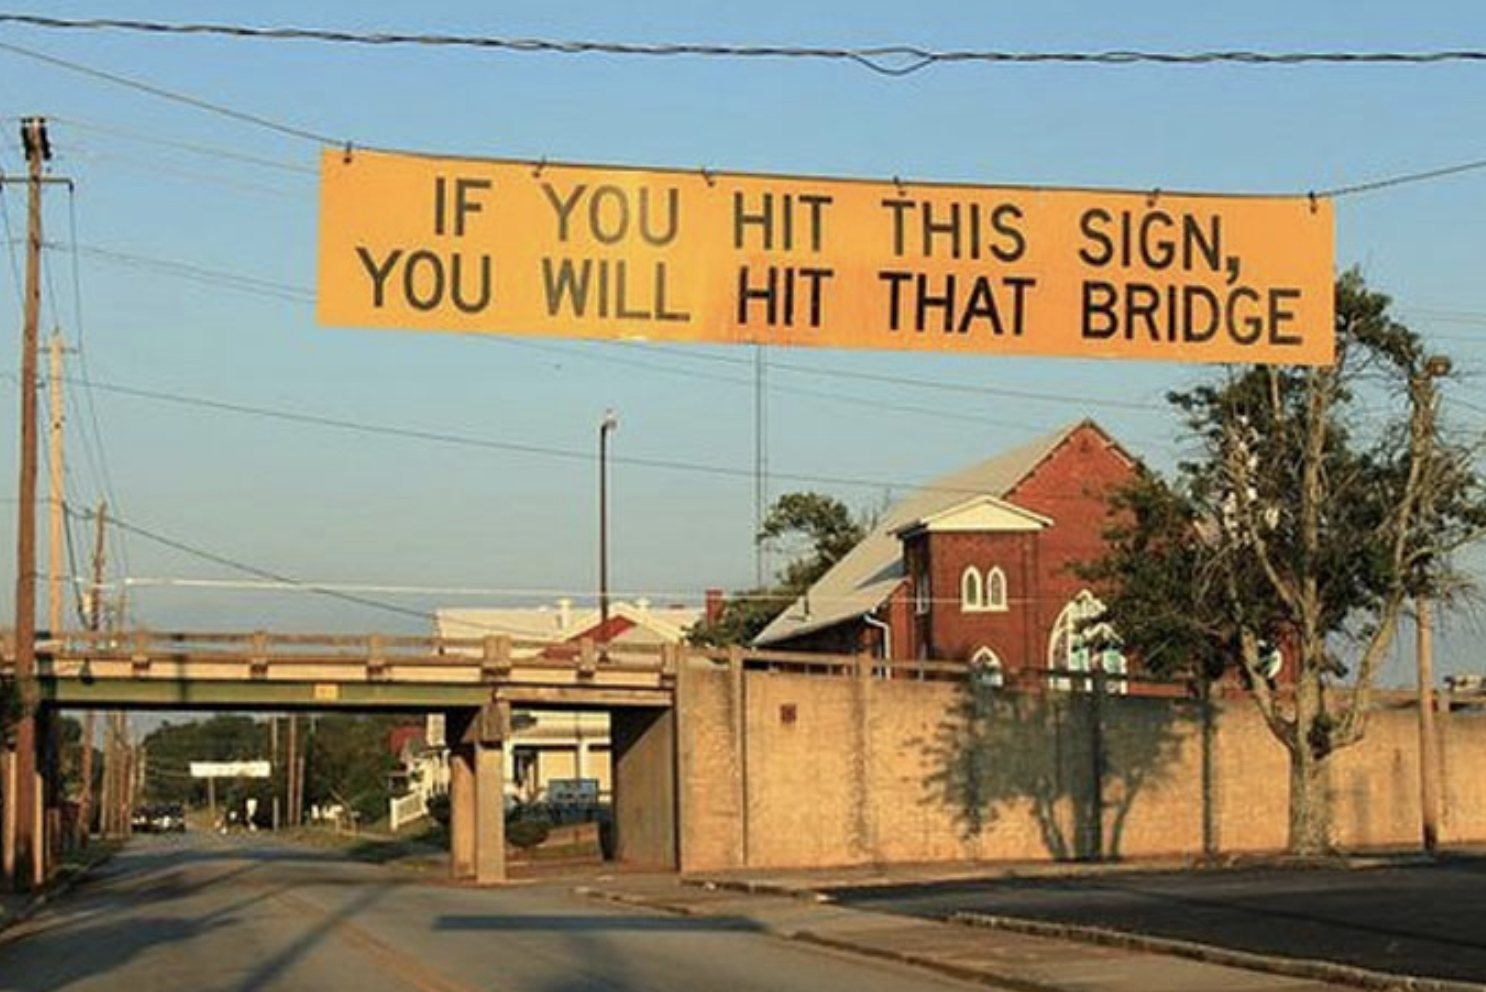 A sign hanging over a street in front of an overpass says &quot;if you hit this sign, you will hit that bridge&quot;